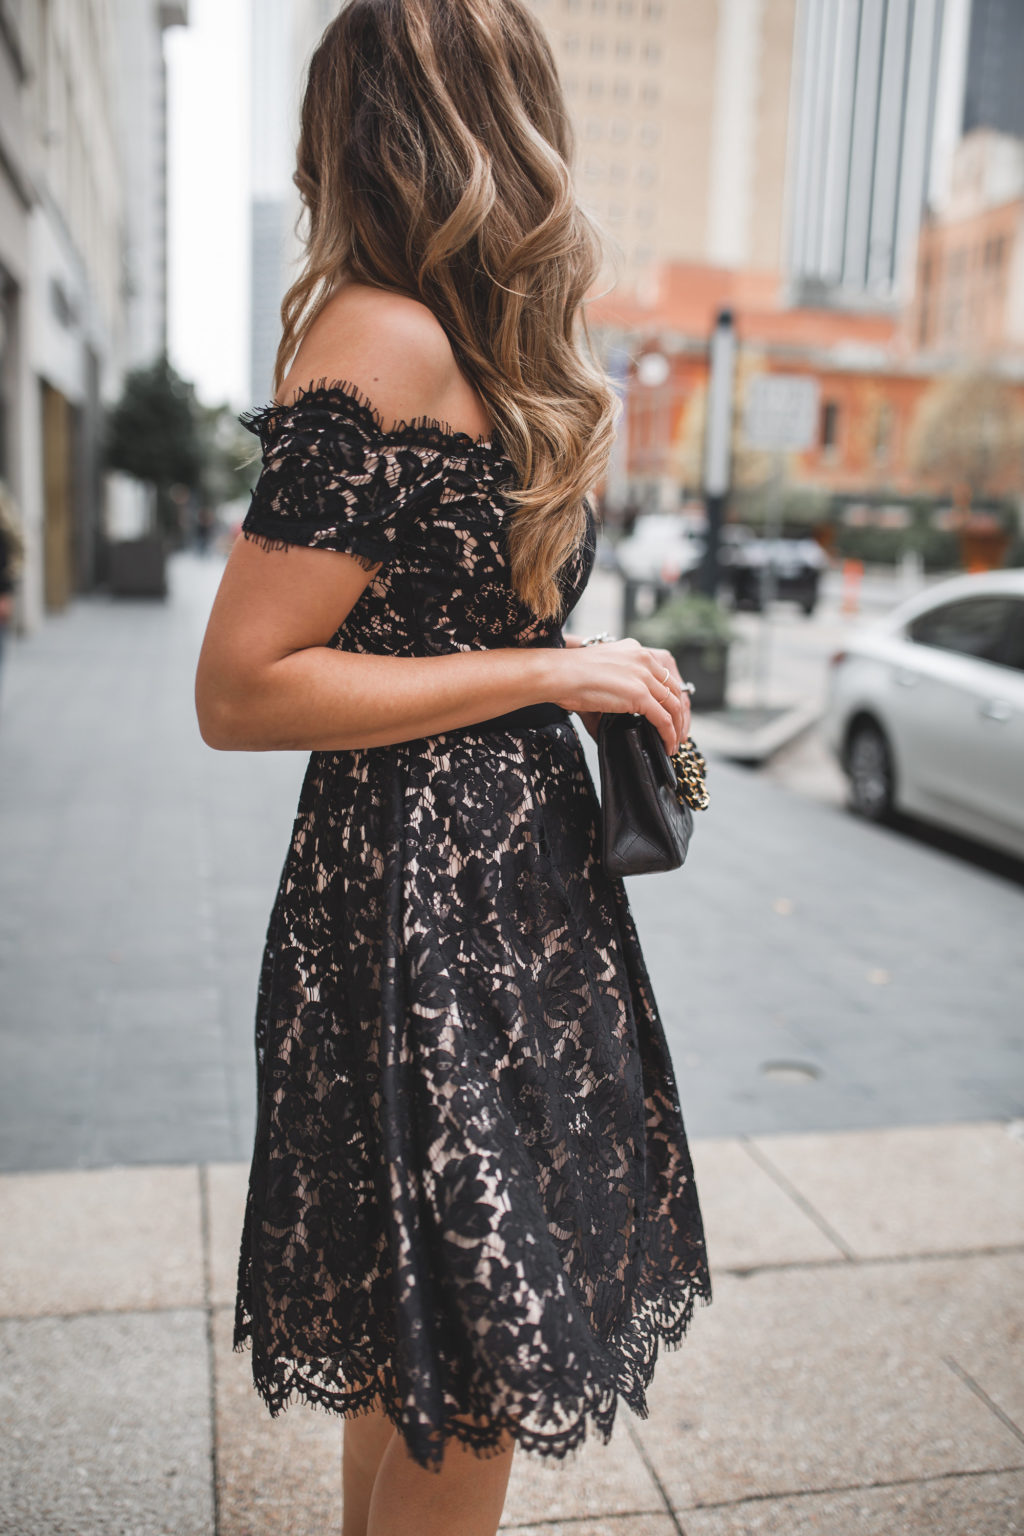 Lace Dress for the Holiday Party